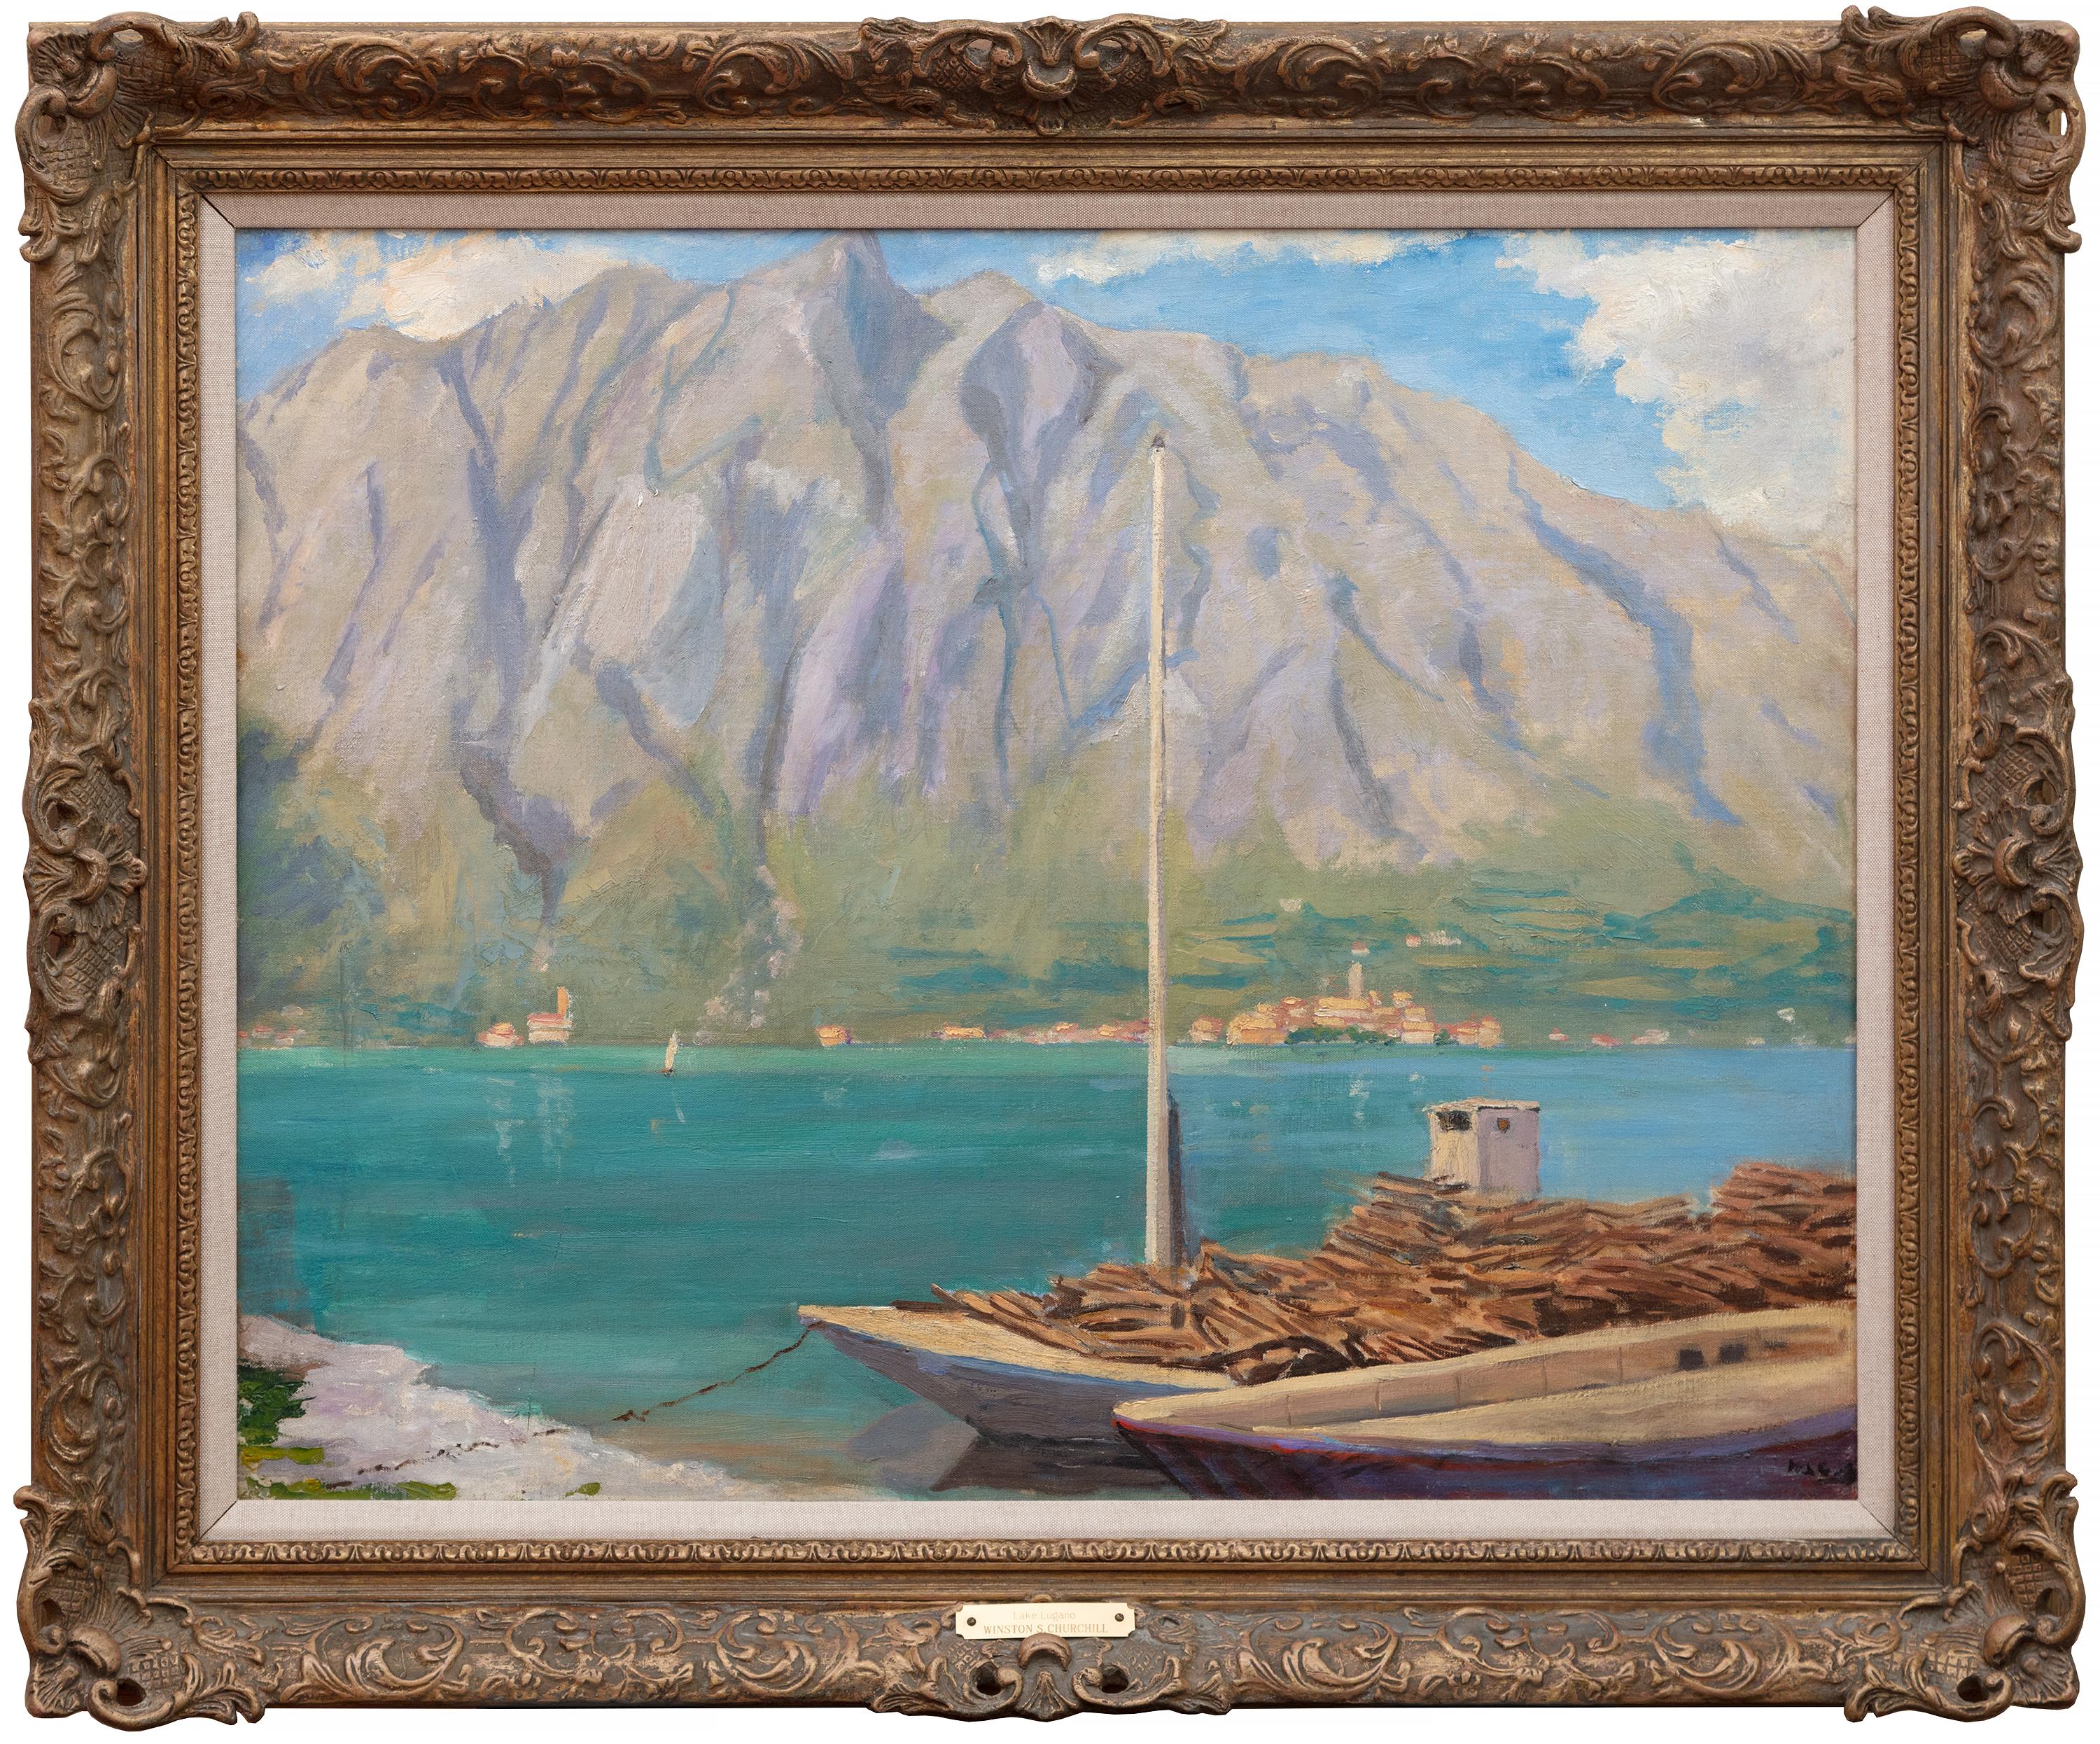 By Lake Lugano - Painting by Winston Churchill